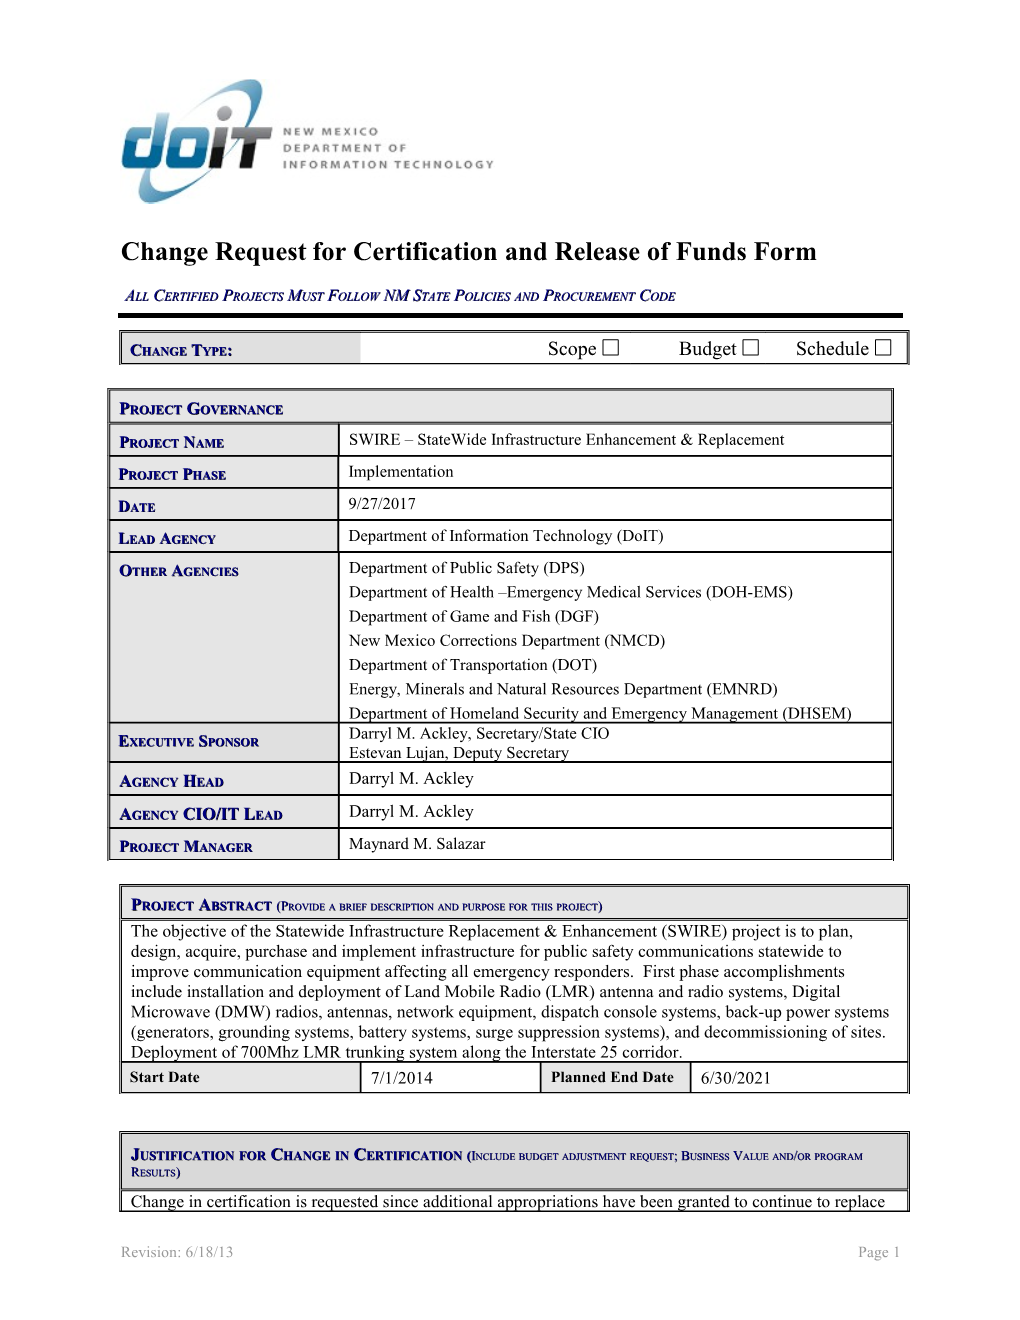 Change Request for Certification and Release of Funds Form s1